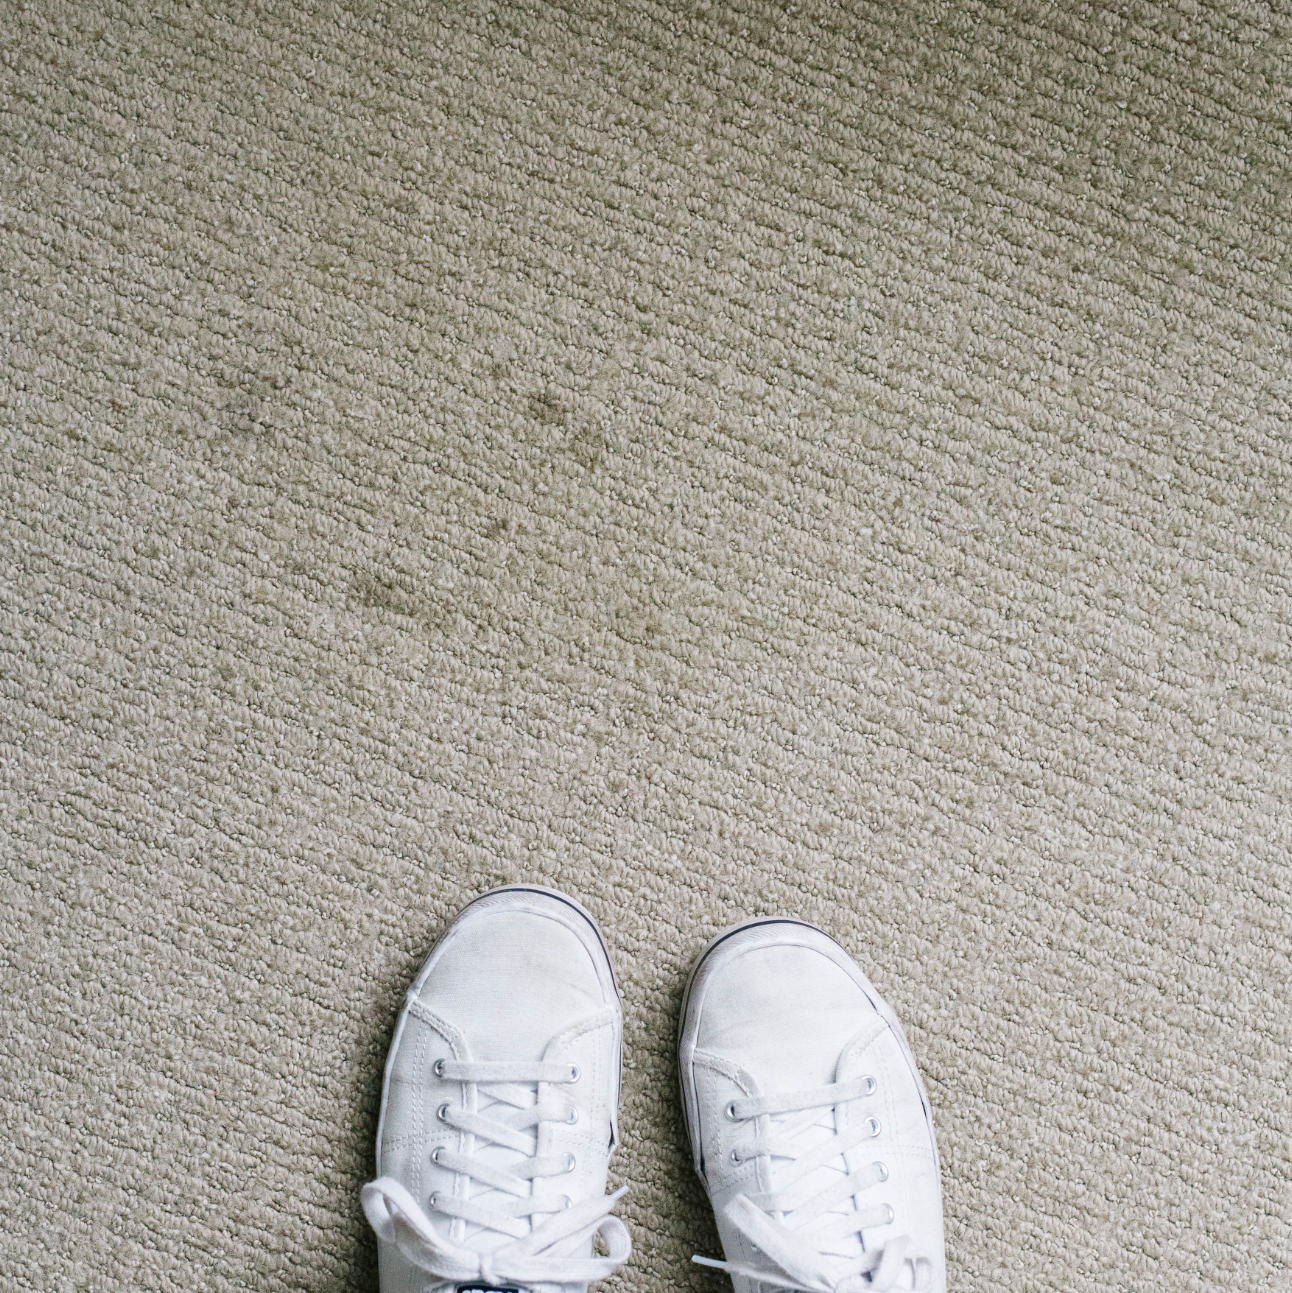 pair of white shoes on beige carpet with wicking stains